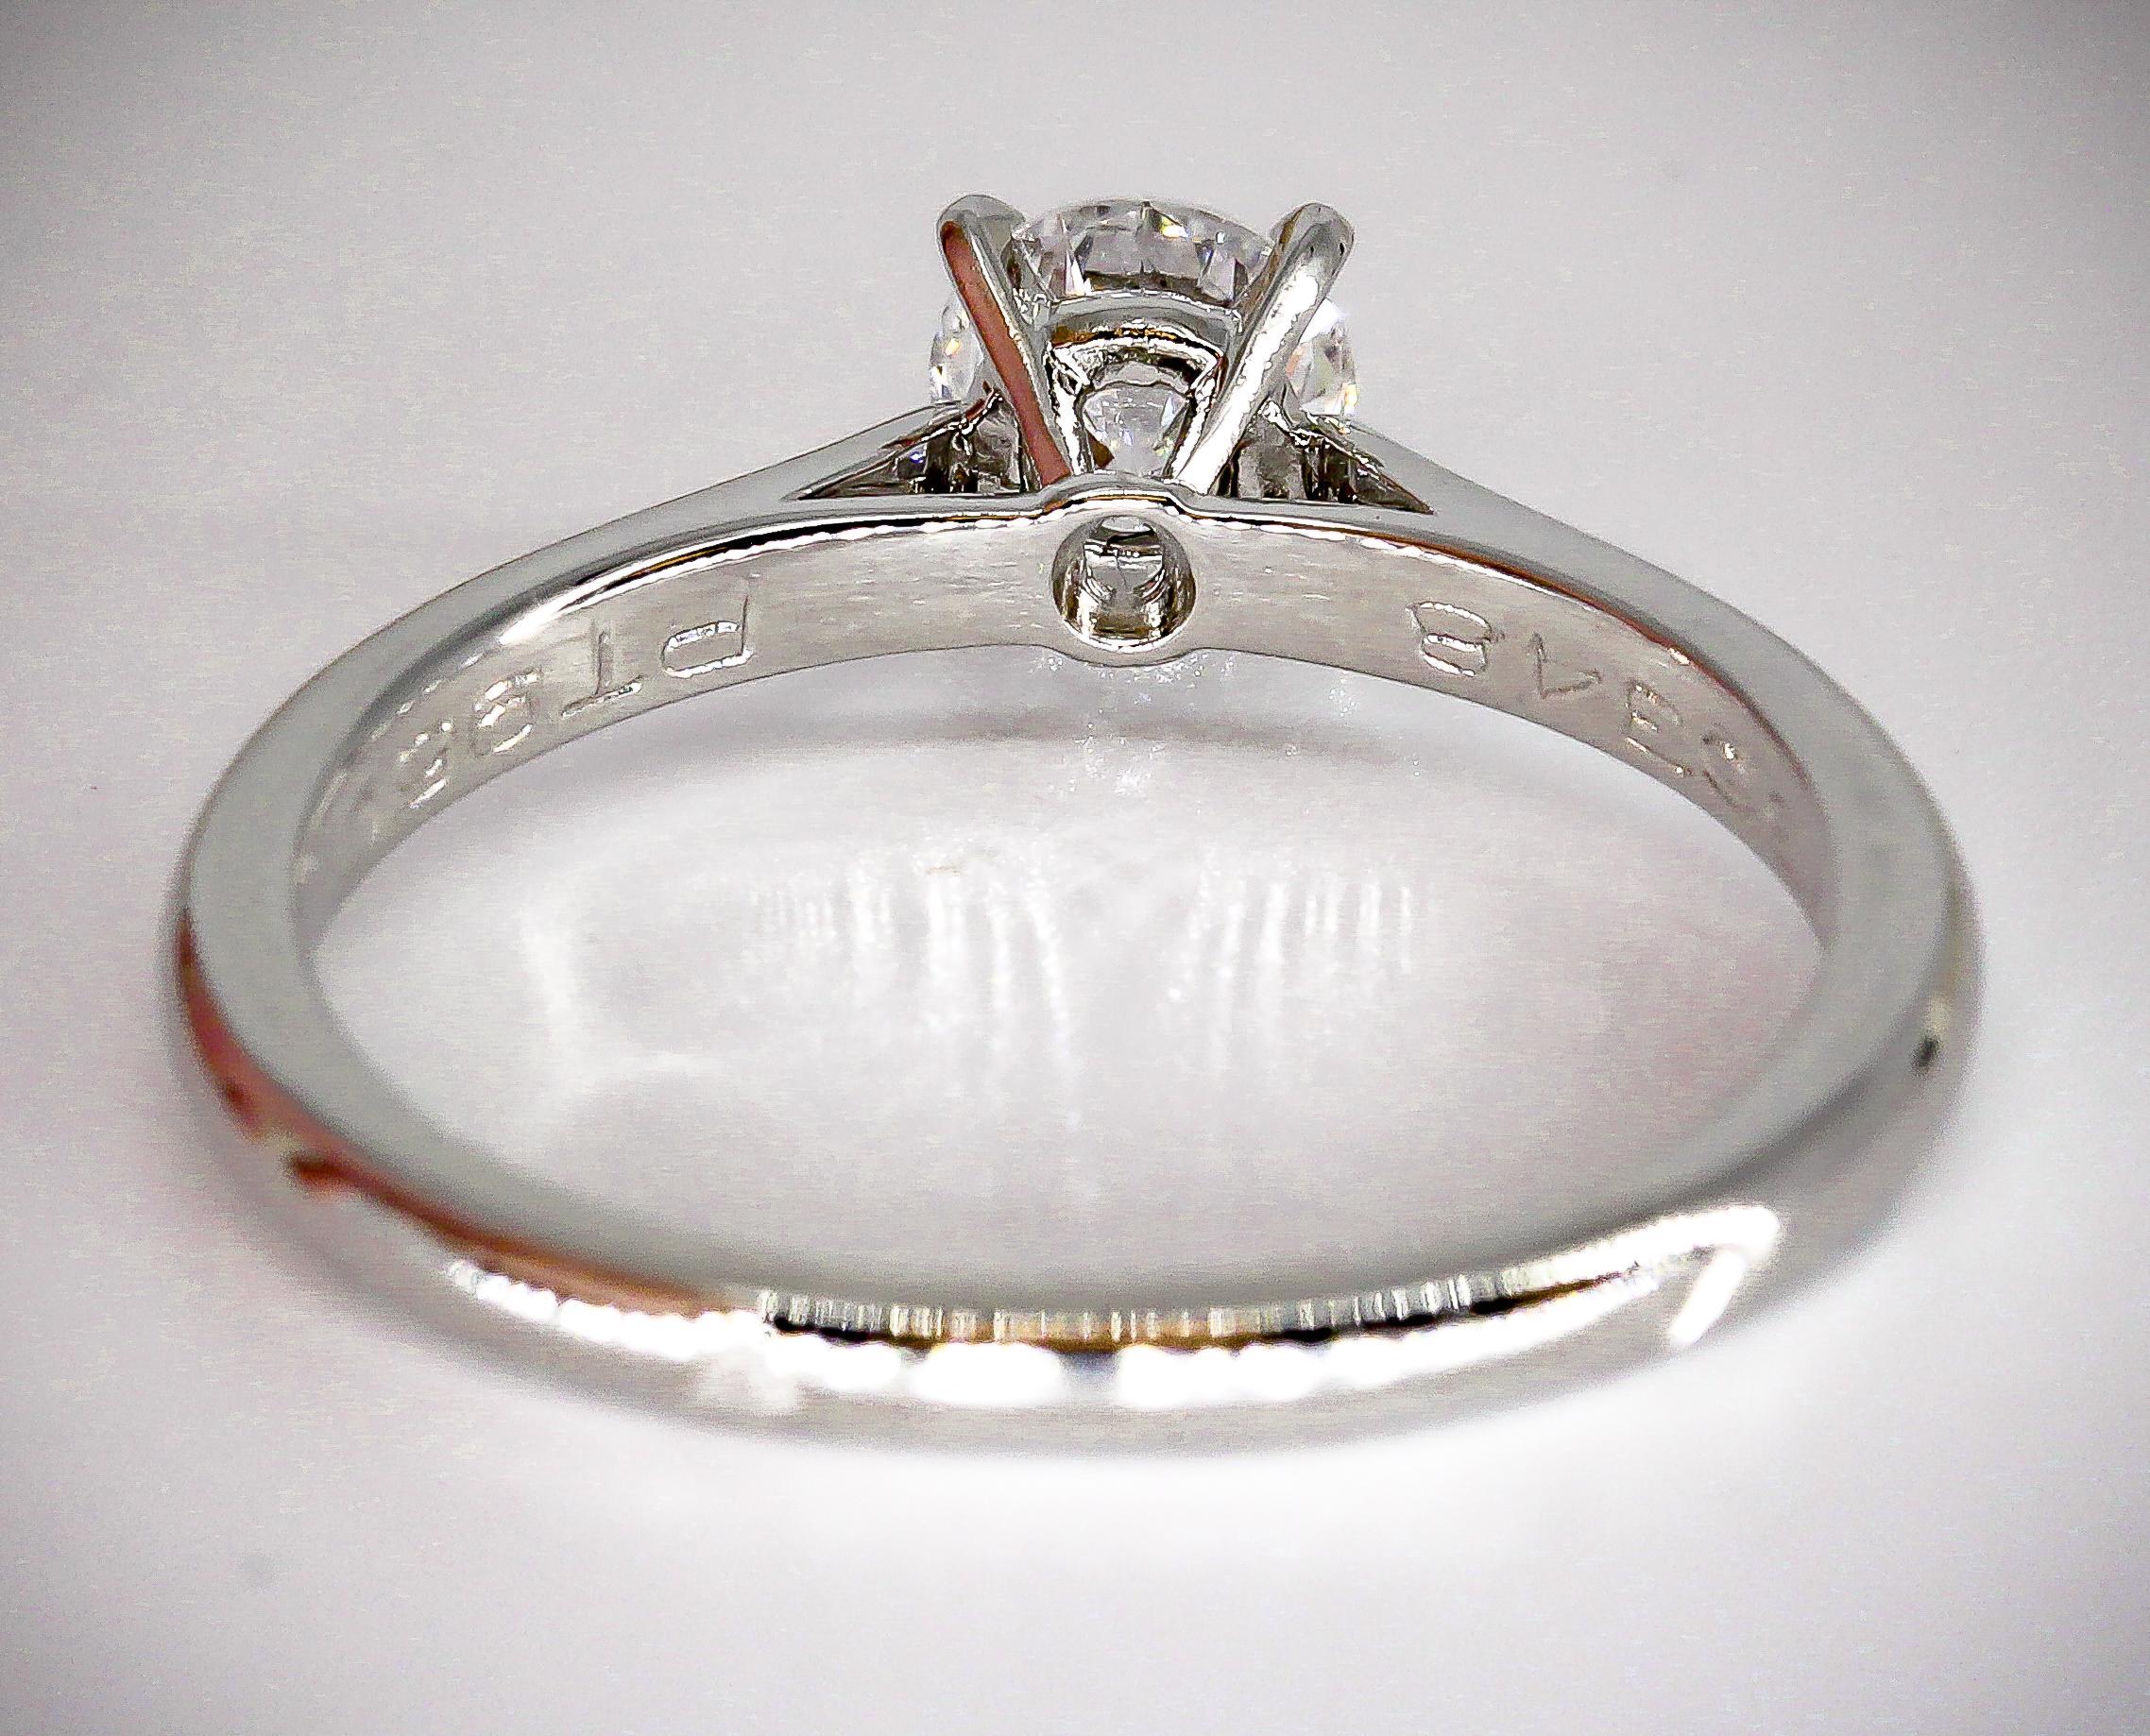 Cartier 0.31 Carat GIA Cert. E VS1 Diamond Platinum Engagement Ring Size 4.5 In Good Condition For Sale In Bellmore, NY